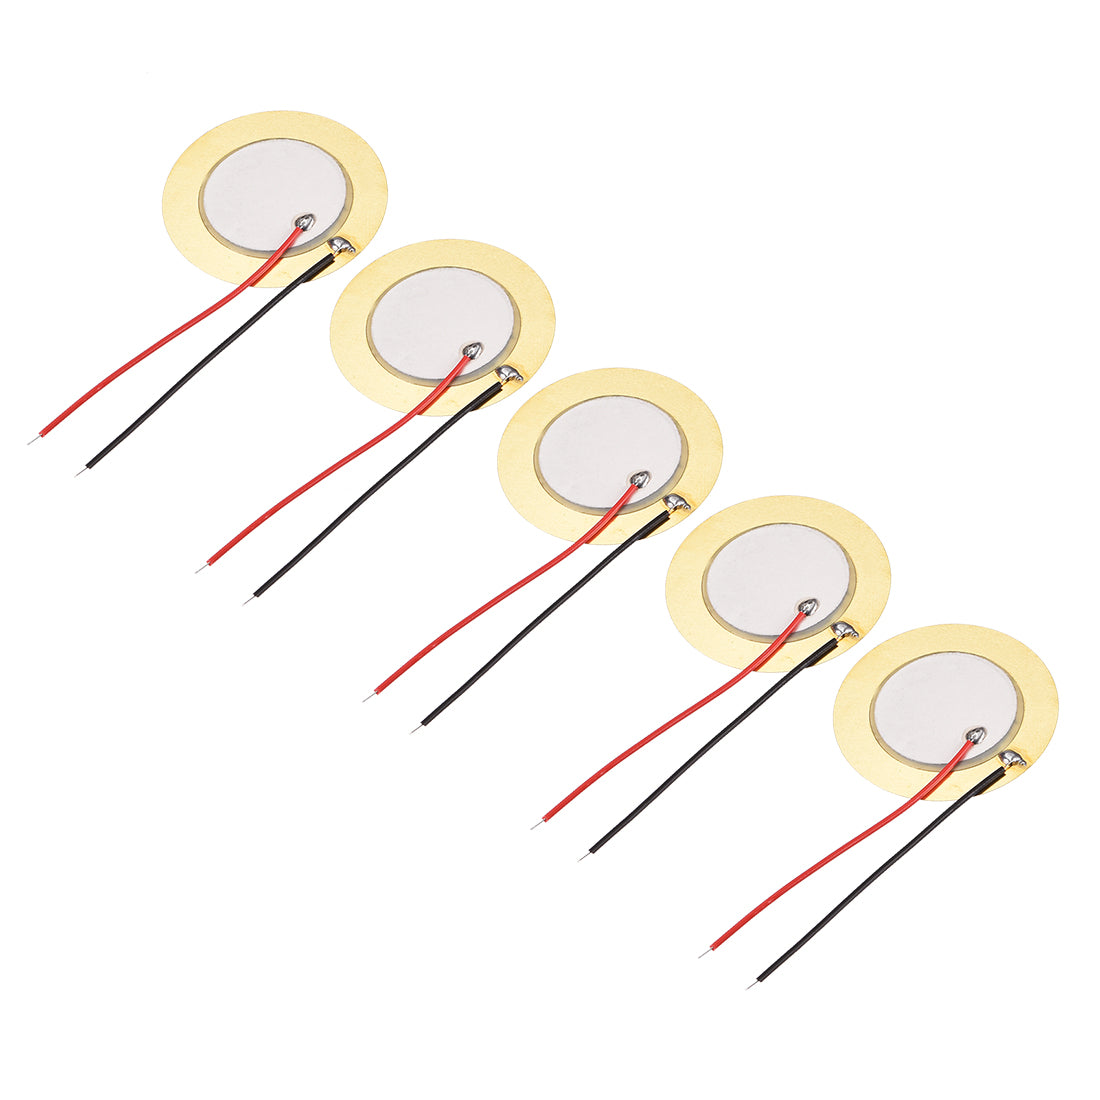 uxcell Uxcell 5 Pcs Piezo Discs 35mm Acoustic Pickup Transducer Microphone Trigger Element CBG Guitar